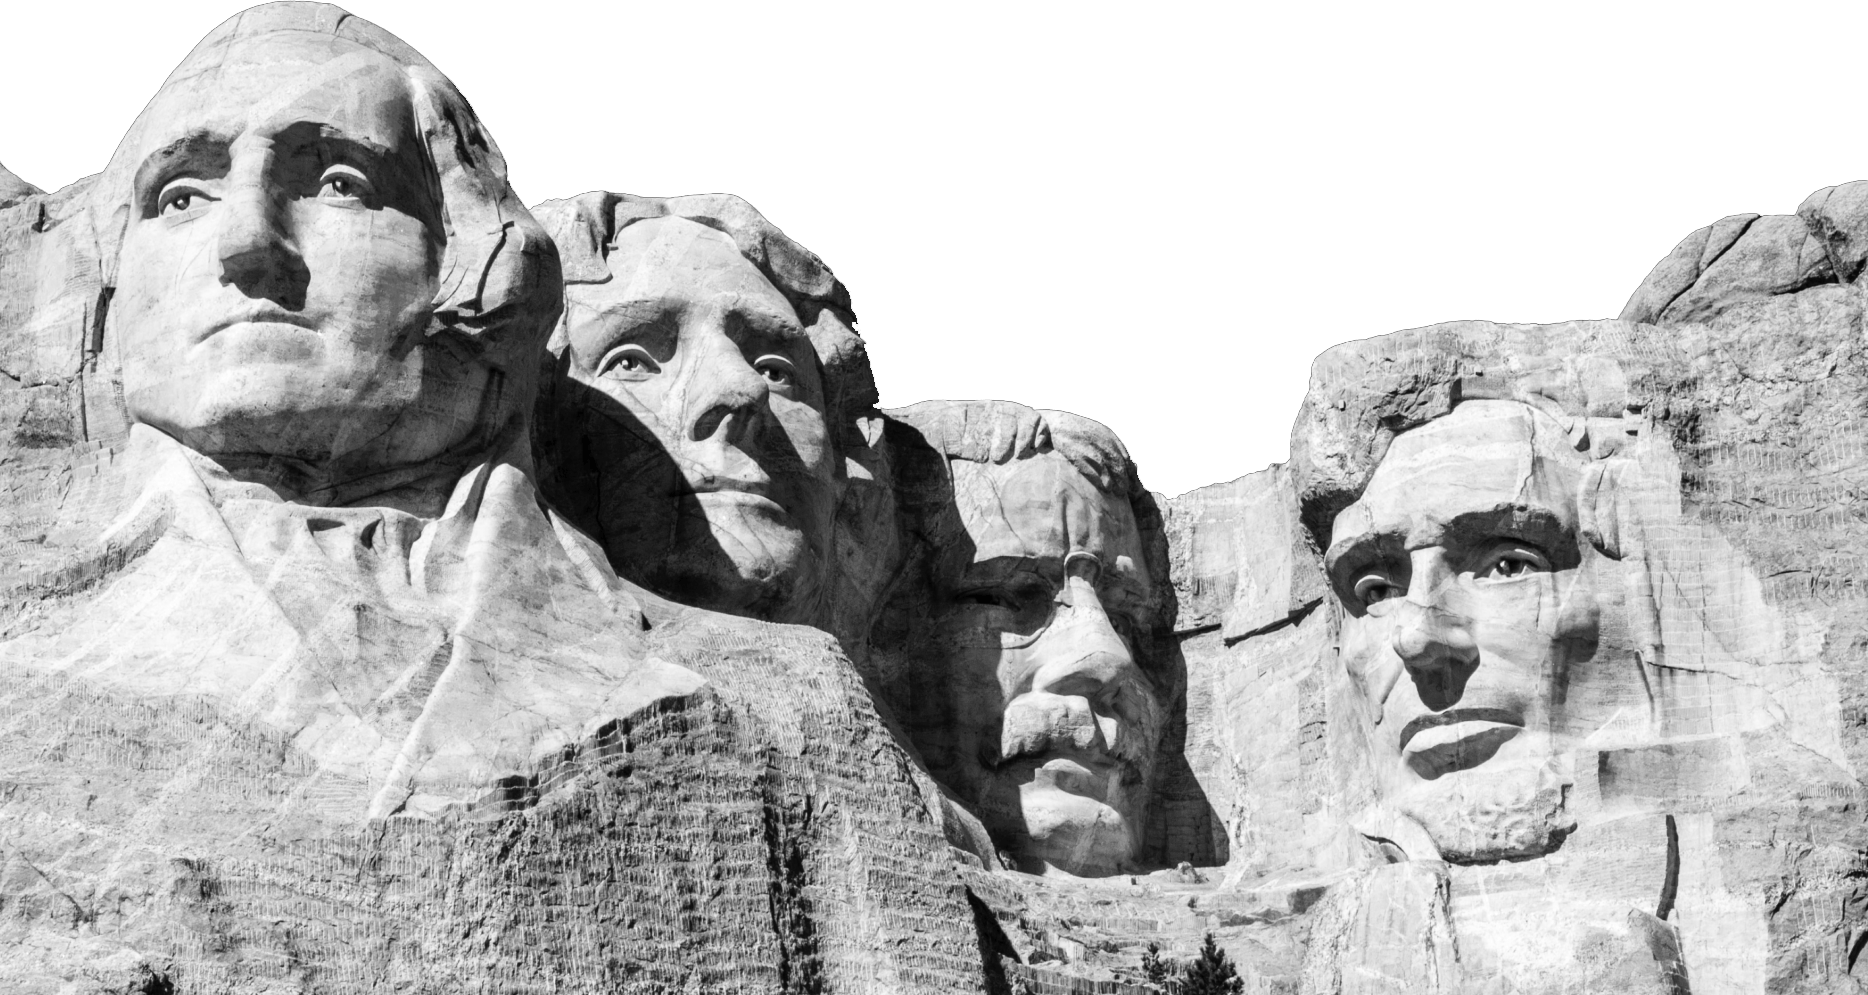 Black and white photograph of Mount Rushmore.